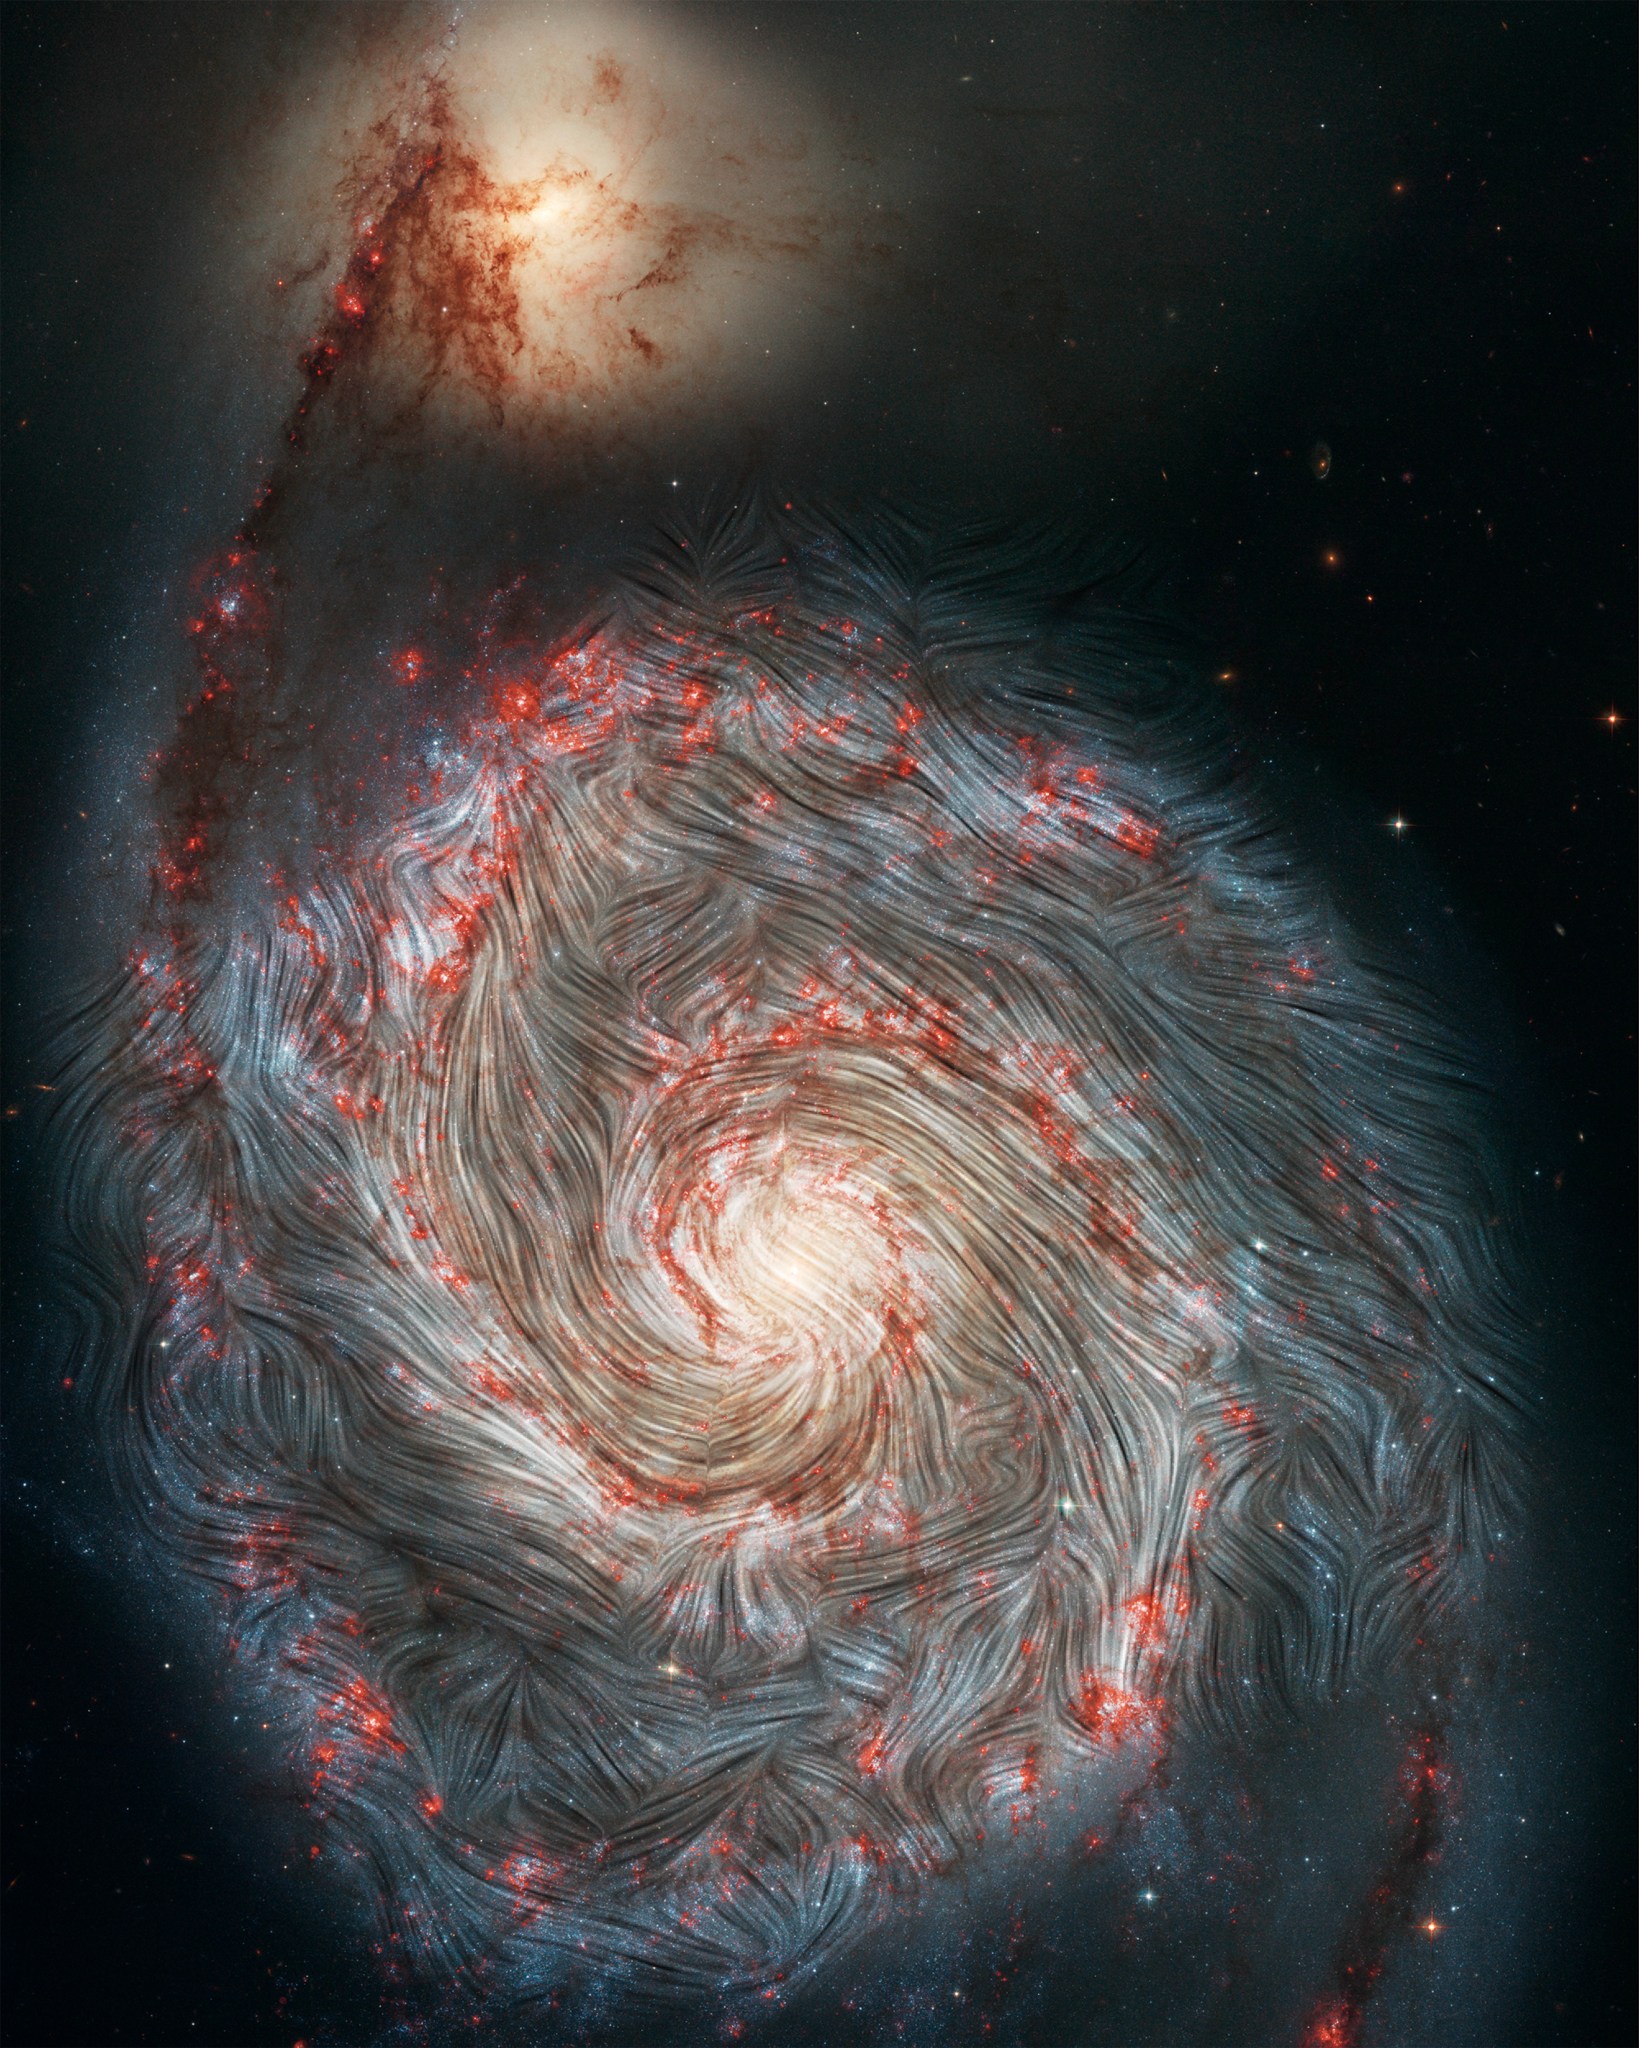 Magnetic field streamlines over an image of the Whirlpool galaxy's blue and red spiral arms.